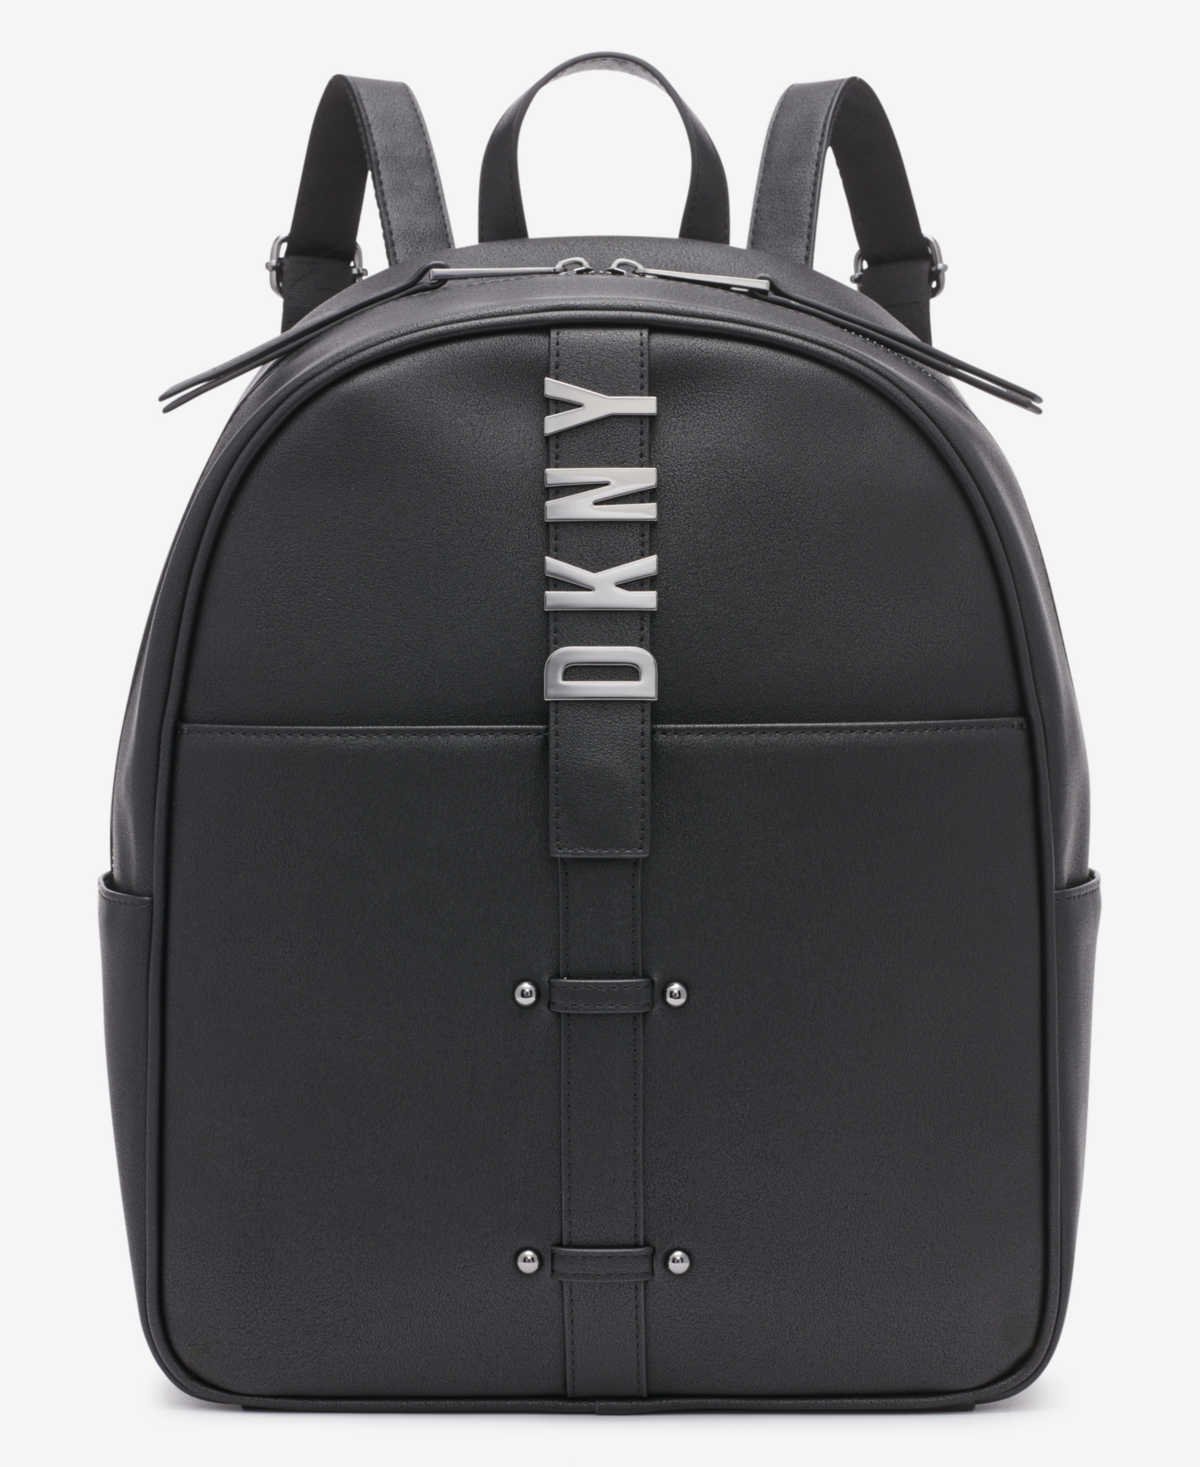 Dkny Nyc Backpack In Black